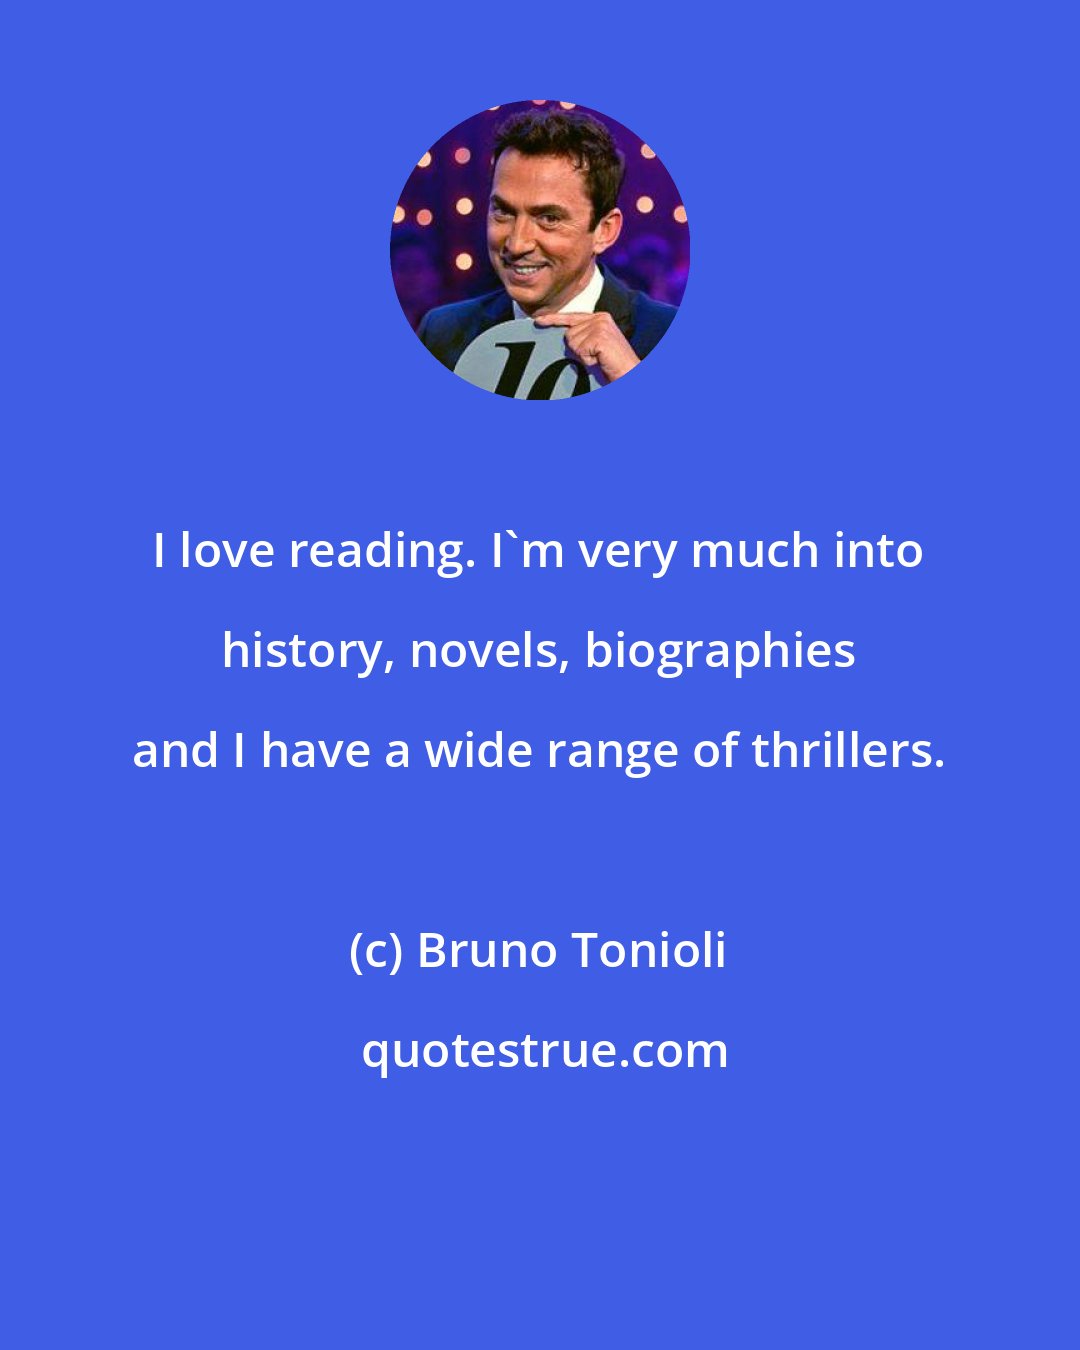 Bruno Tonioli: I love reading. I'm very much into history, novels, biographies and I have a wide range of thrillers.